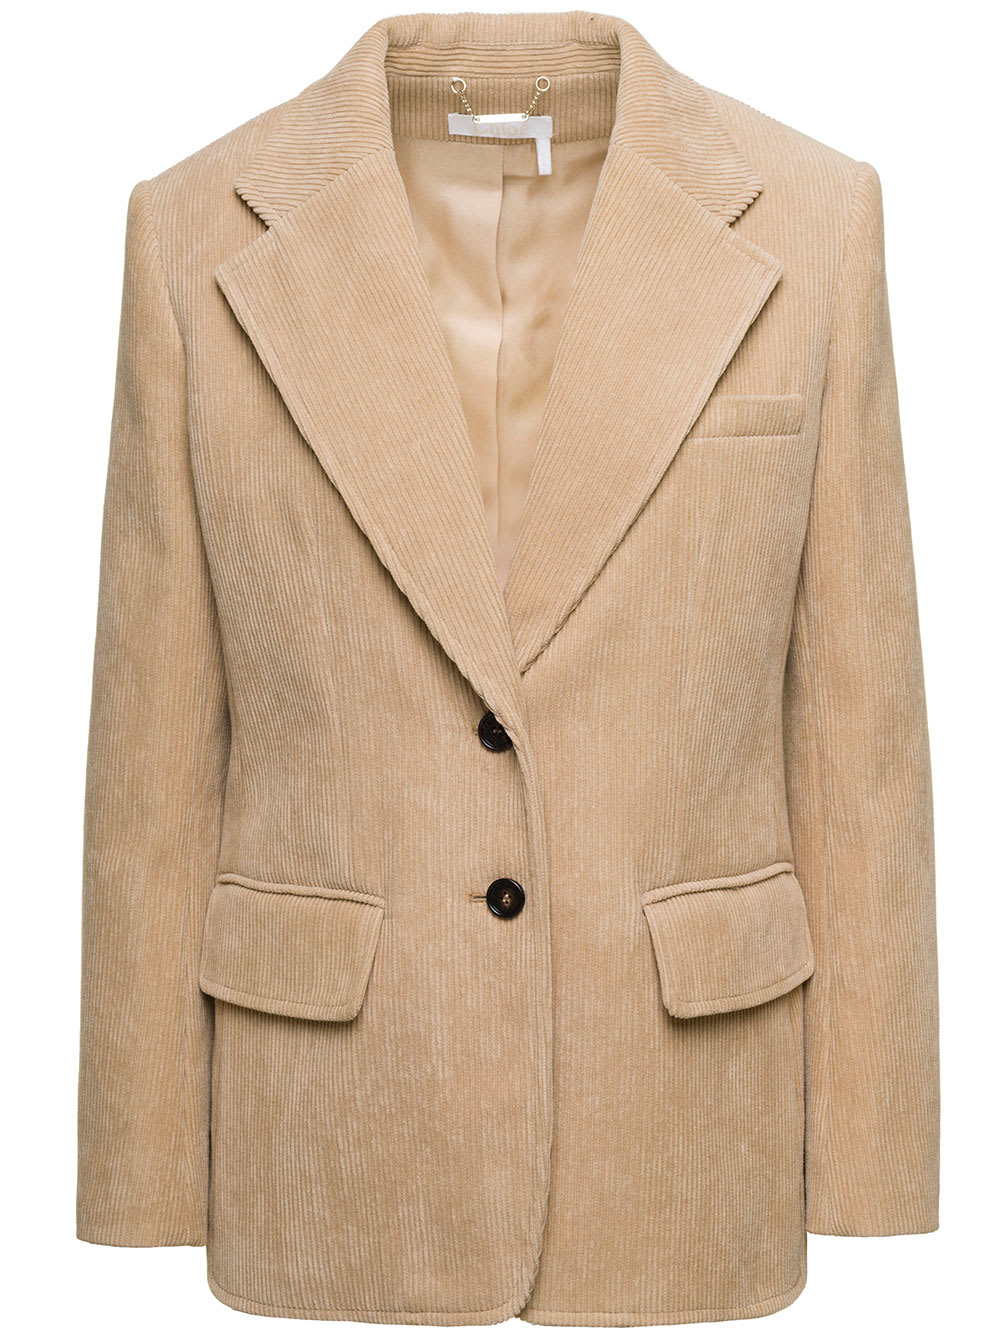 CHLOÉ BEIGE SINGLE-BREASTED JACKET WITH NOTCHED REVERS IN COTTON VELVET WOMAN